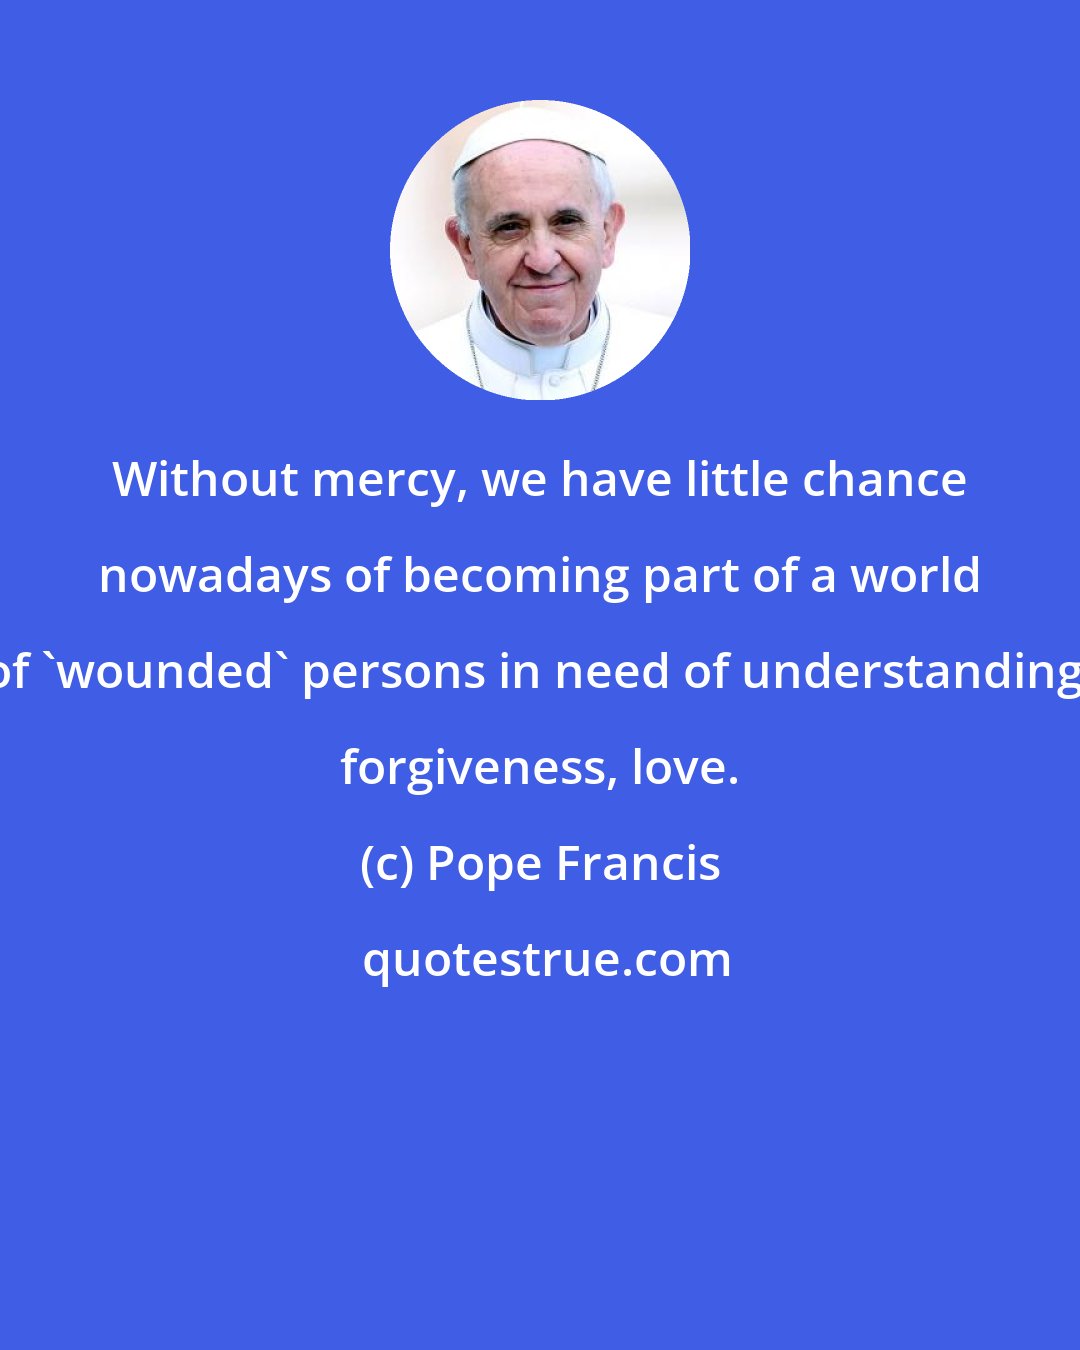 Pope Francis: Without mercy, we have little chance nowadays of becoming part of a world of 'wounded' persons in need of understanding, forgiveness, love.